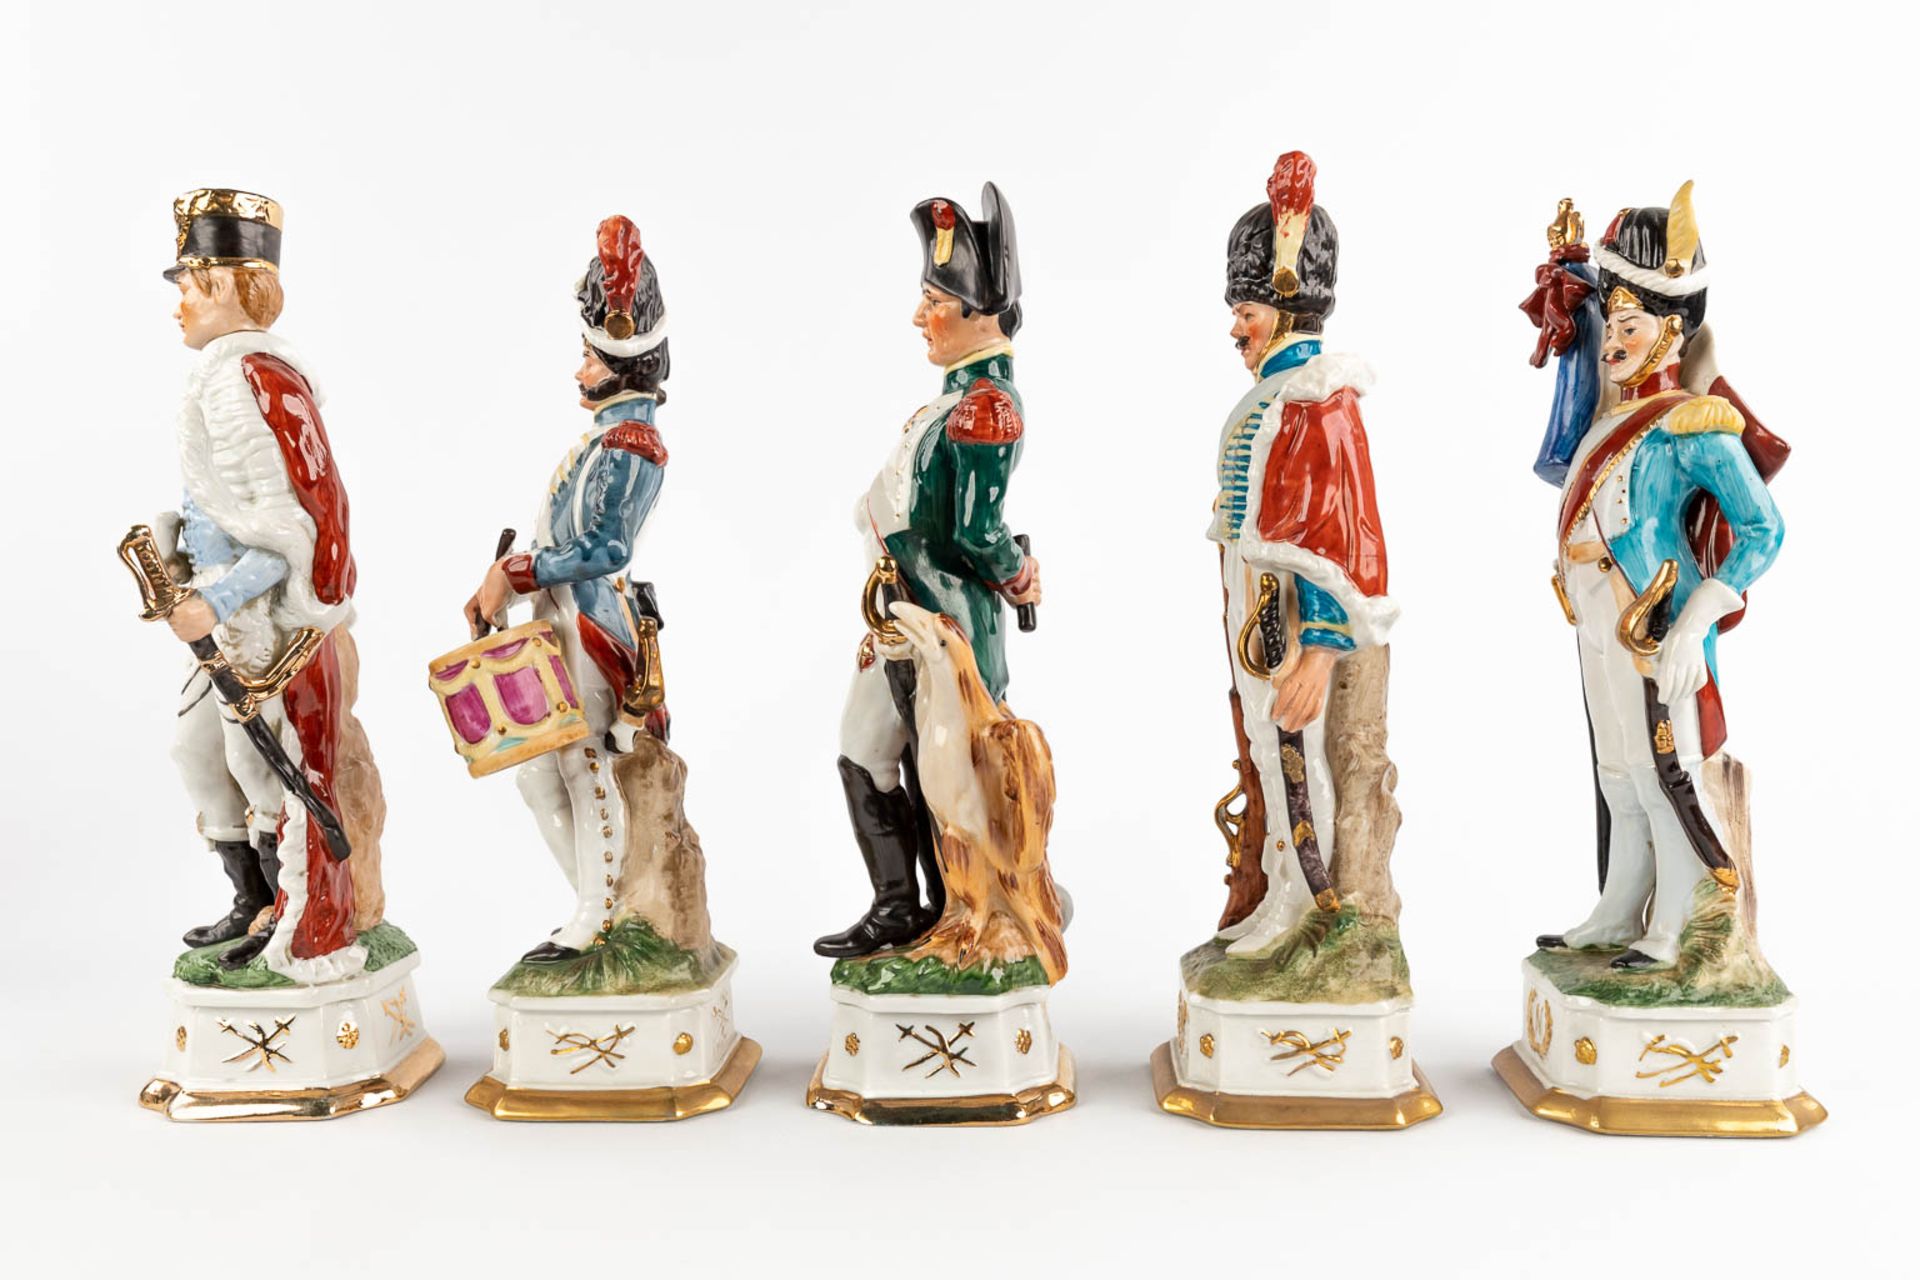 Napoleon and 9 generals, polychrome porcelain. 20th C. (H:32 cm) - Image 14 of 15